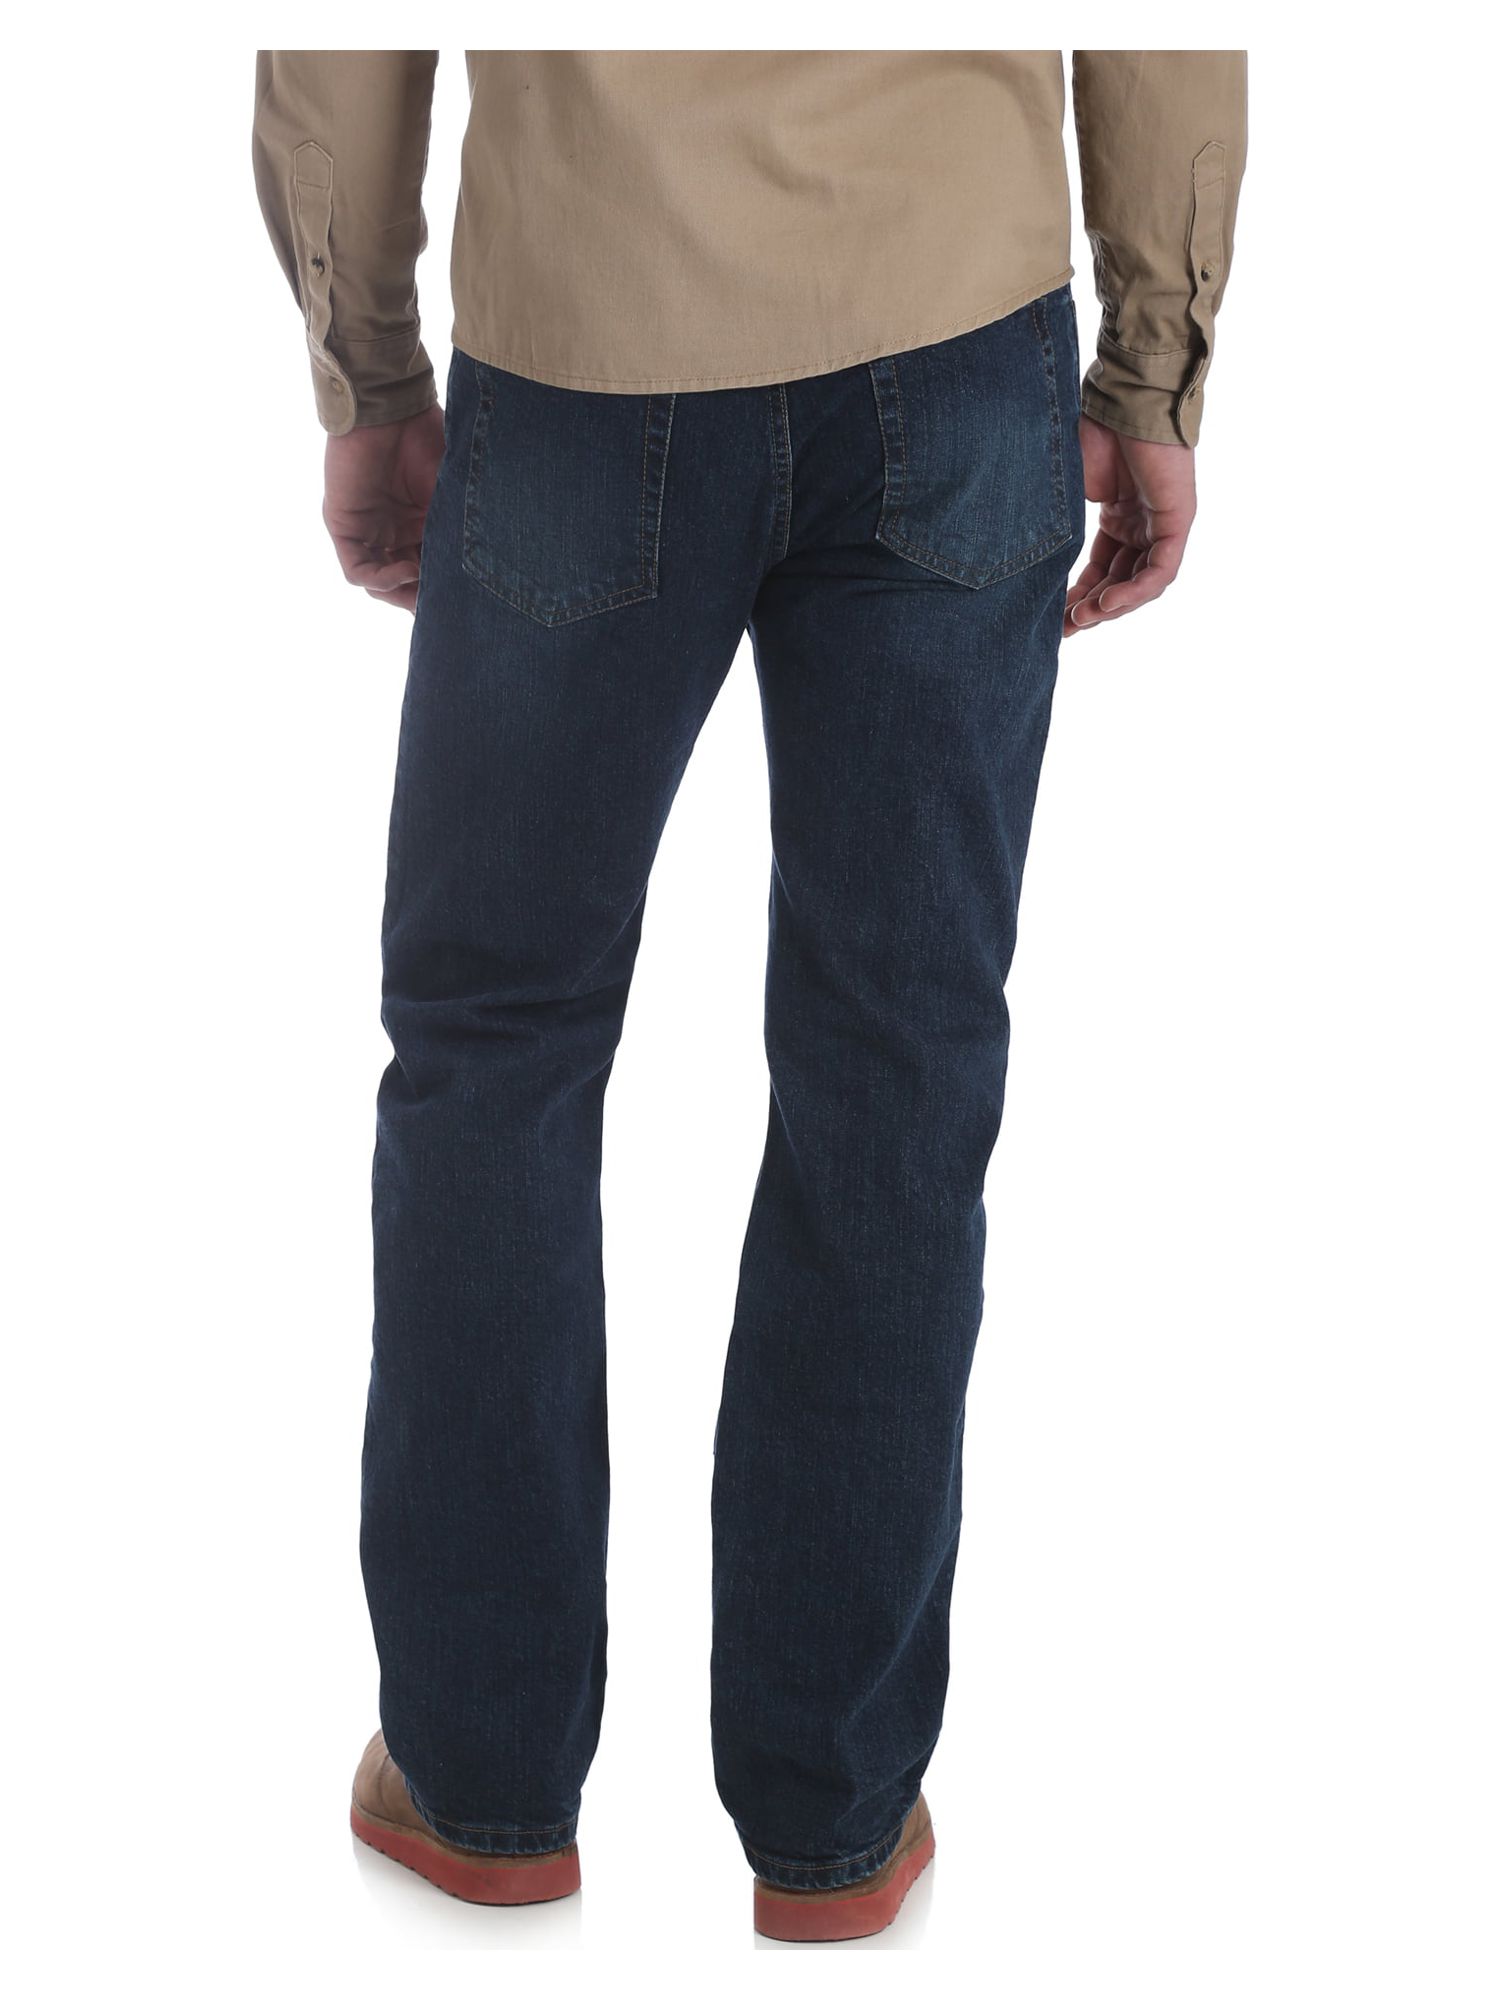 Wrangler Men's and Big Men's Straight Fit Jeans with Flex - image 3 of 7